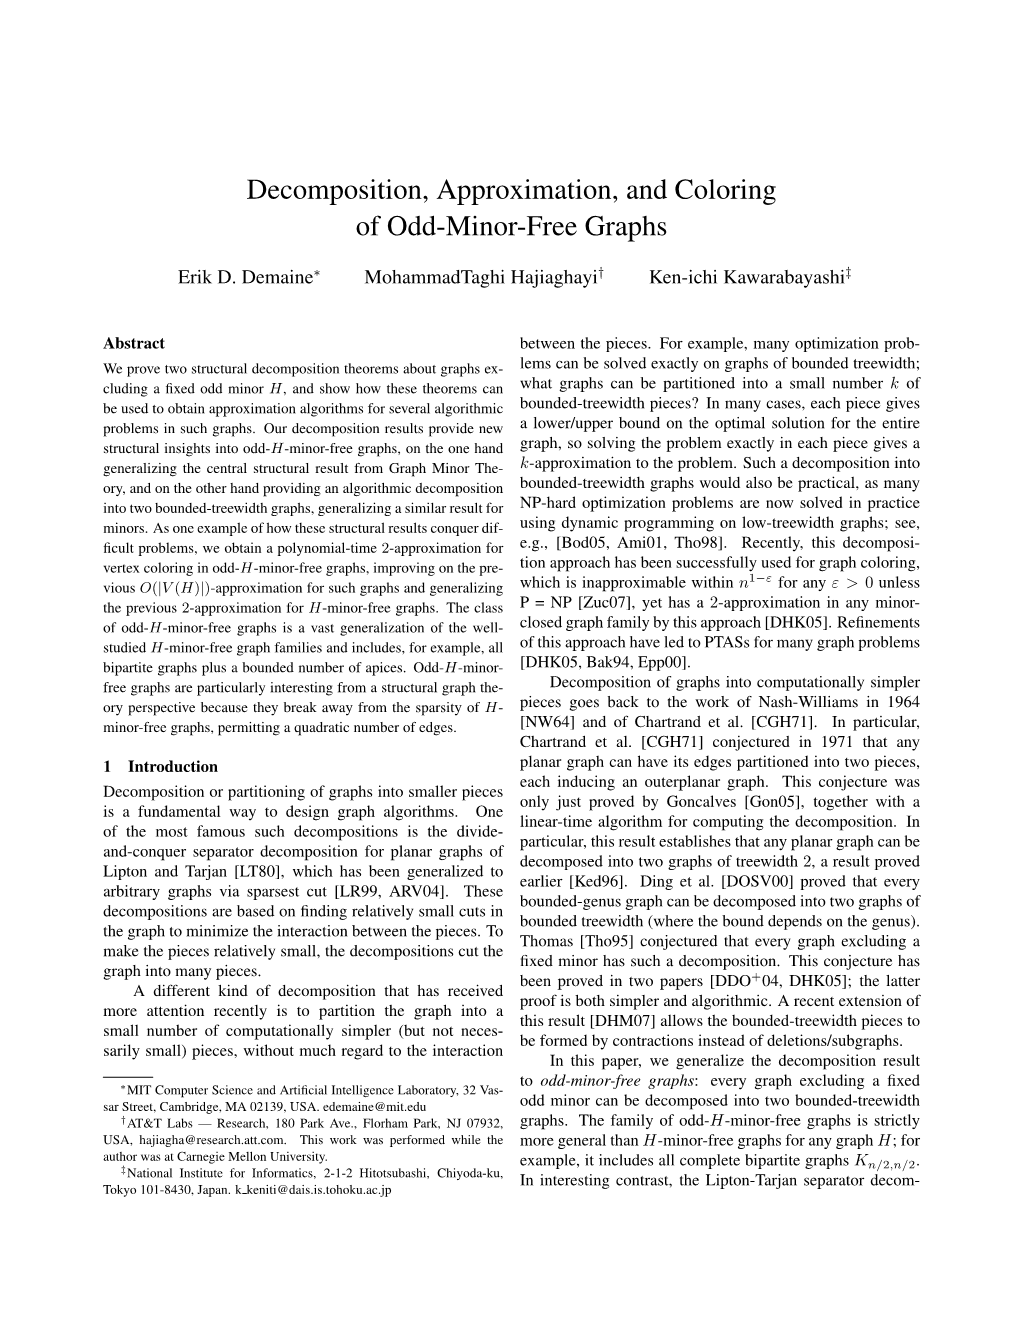 Decomposition, Approximation, and Coloring of Odd-Minor-Free Graphs